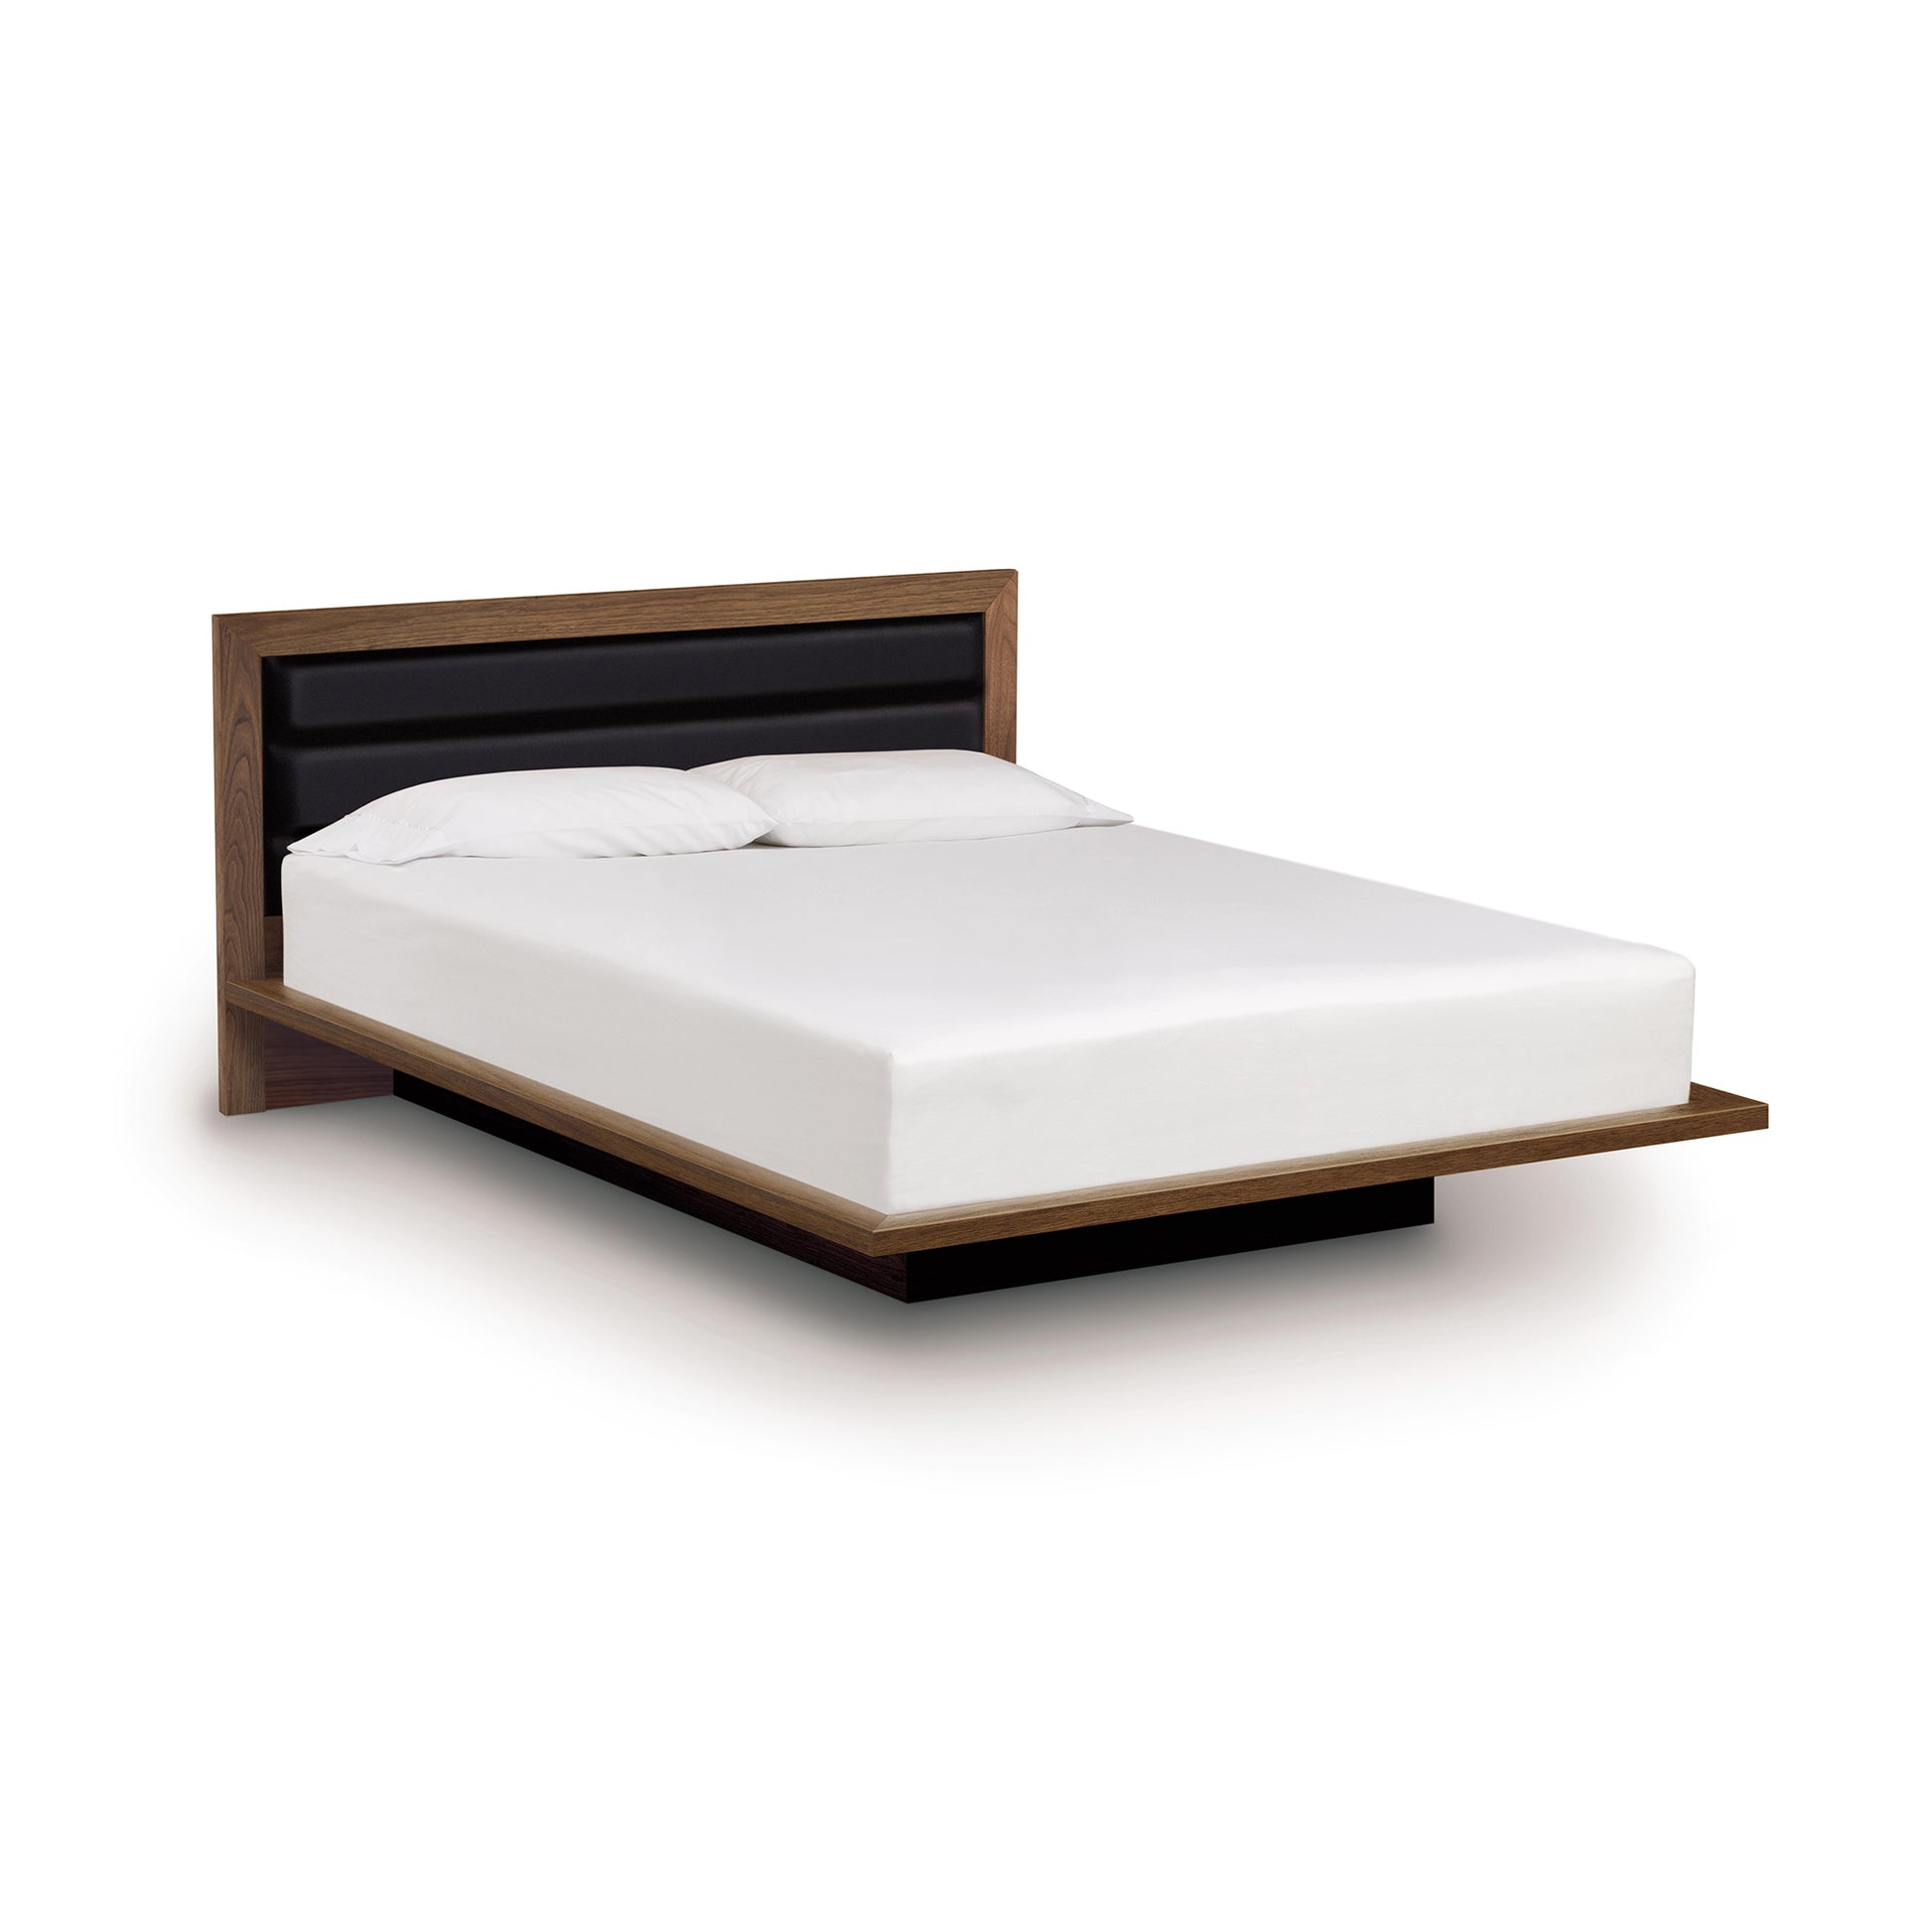 Copeland Furniture Moduluxe Platform Bed with Upholstered Headboard - 35" Series, minimalist design with solid wood frame and sleek black upholstered headboard. White linen bedding and pillows enhance this modern platform bed, ideal for any high-quality American made bedroom furniture collection.